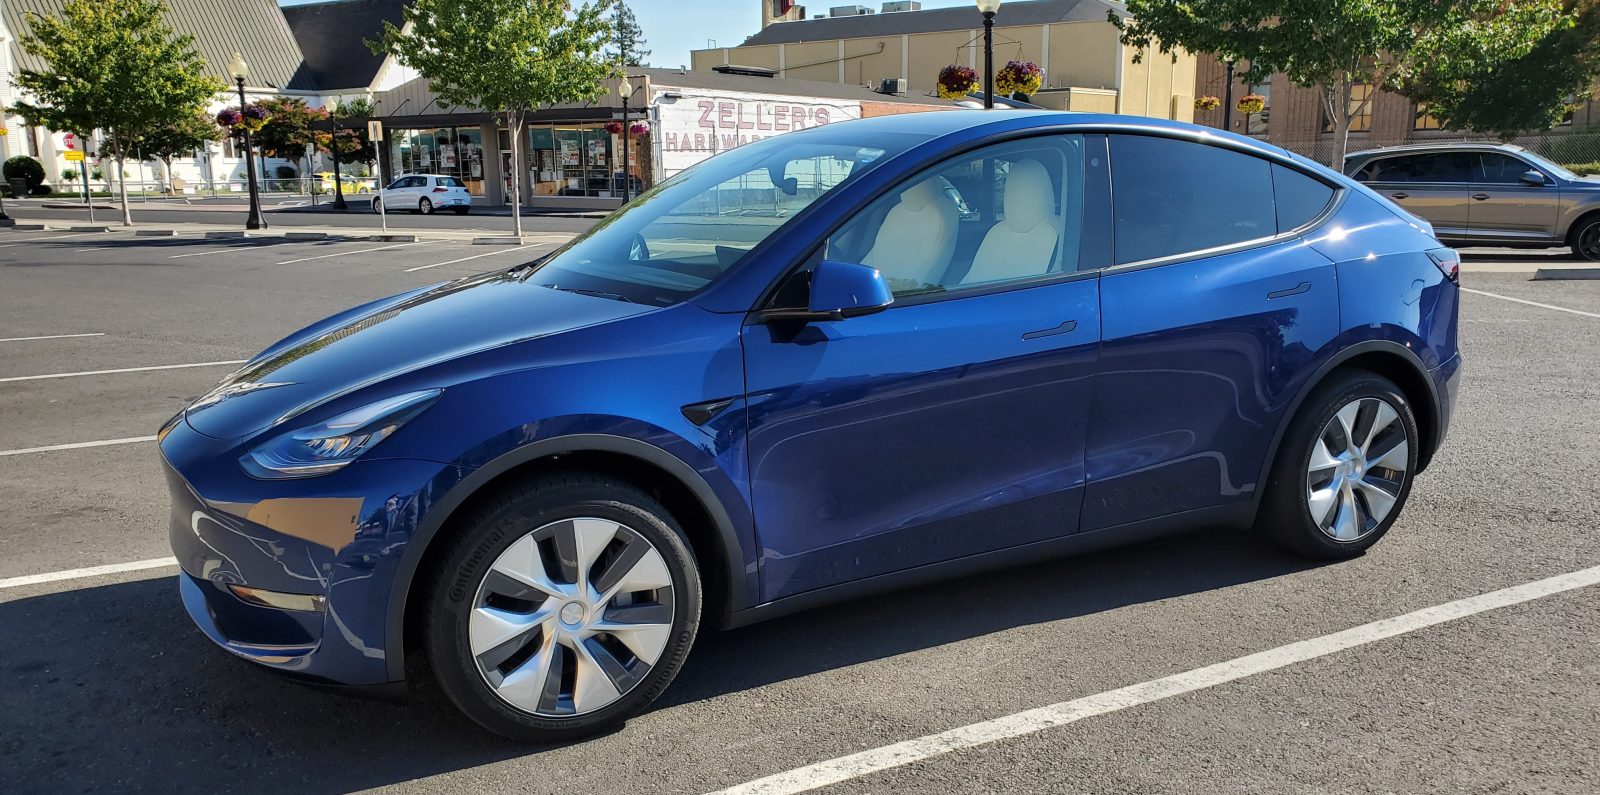 Brand-New Model Y Owner Discovers Tesla's Quality Control Is Lacking